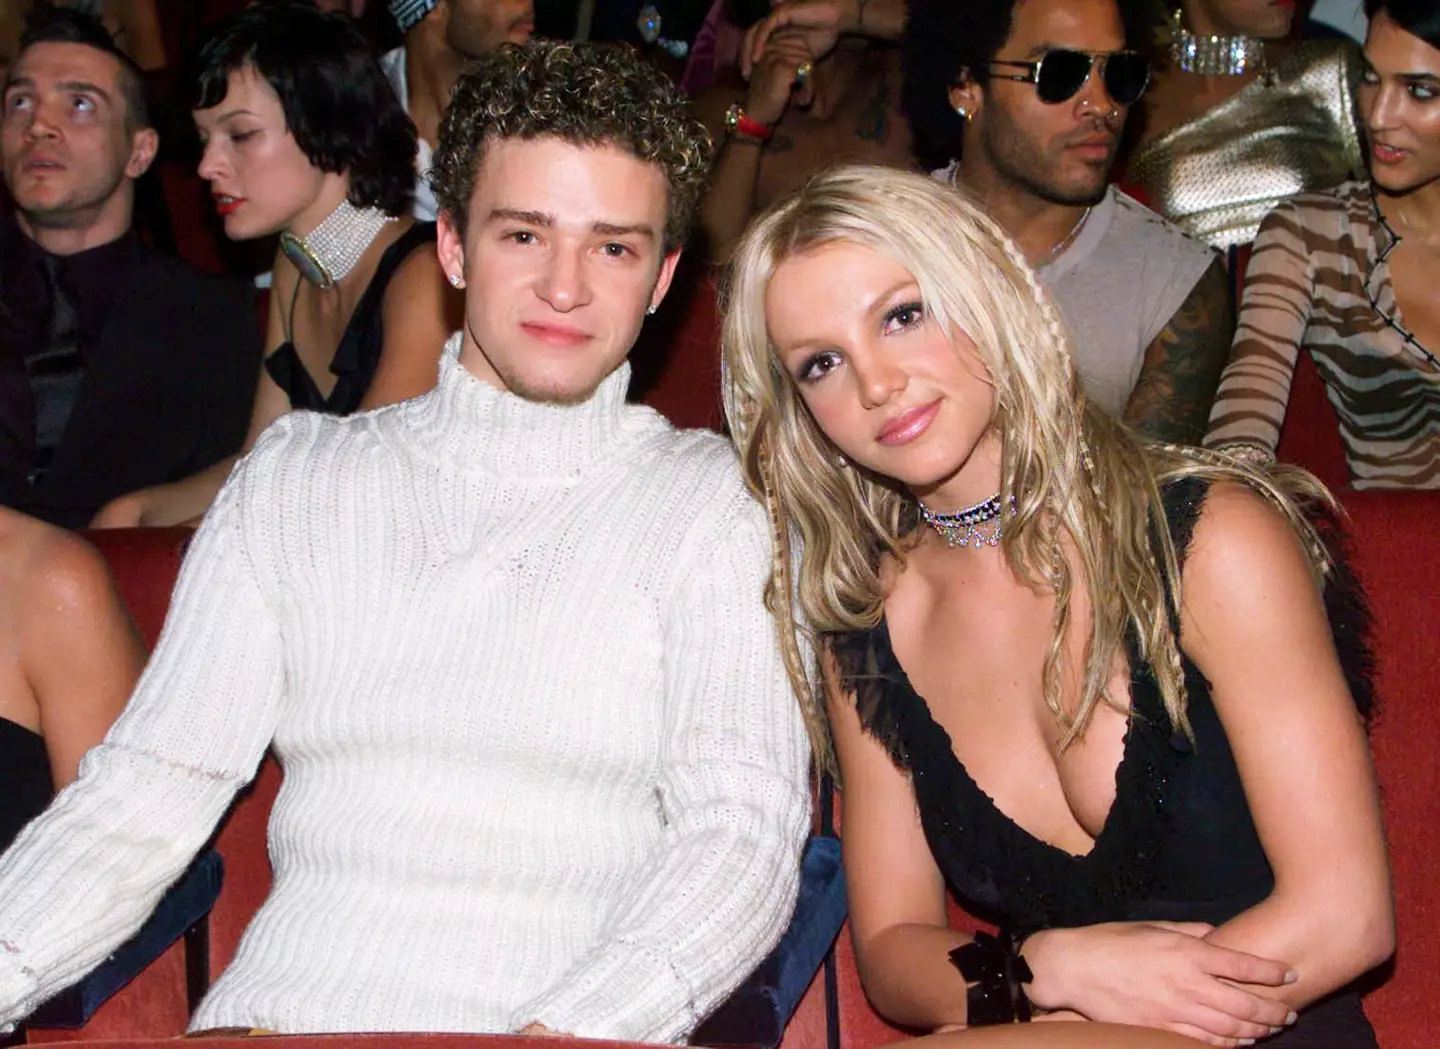 Justin Timberlake and Britney Spears dated in the early 00s.